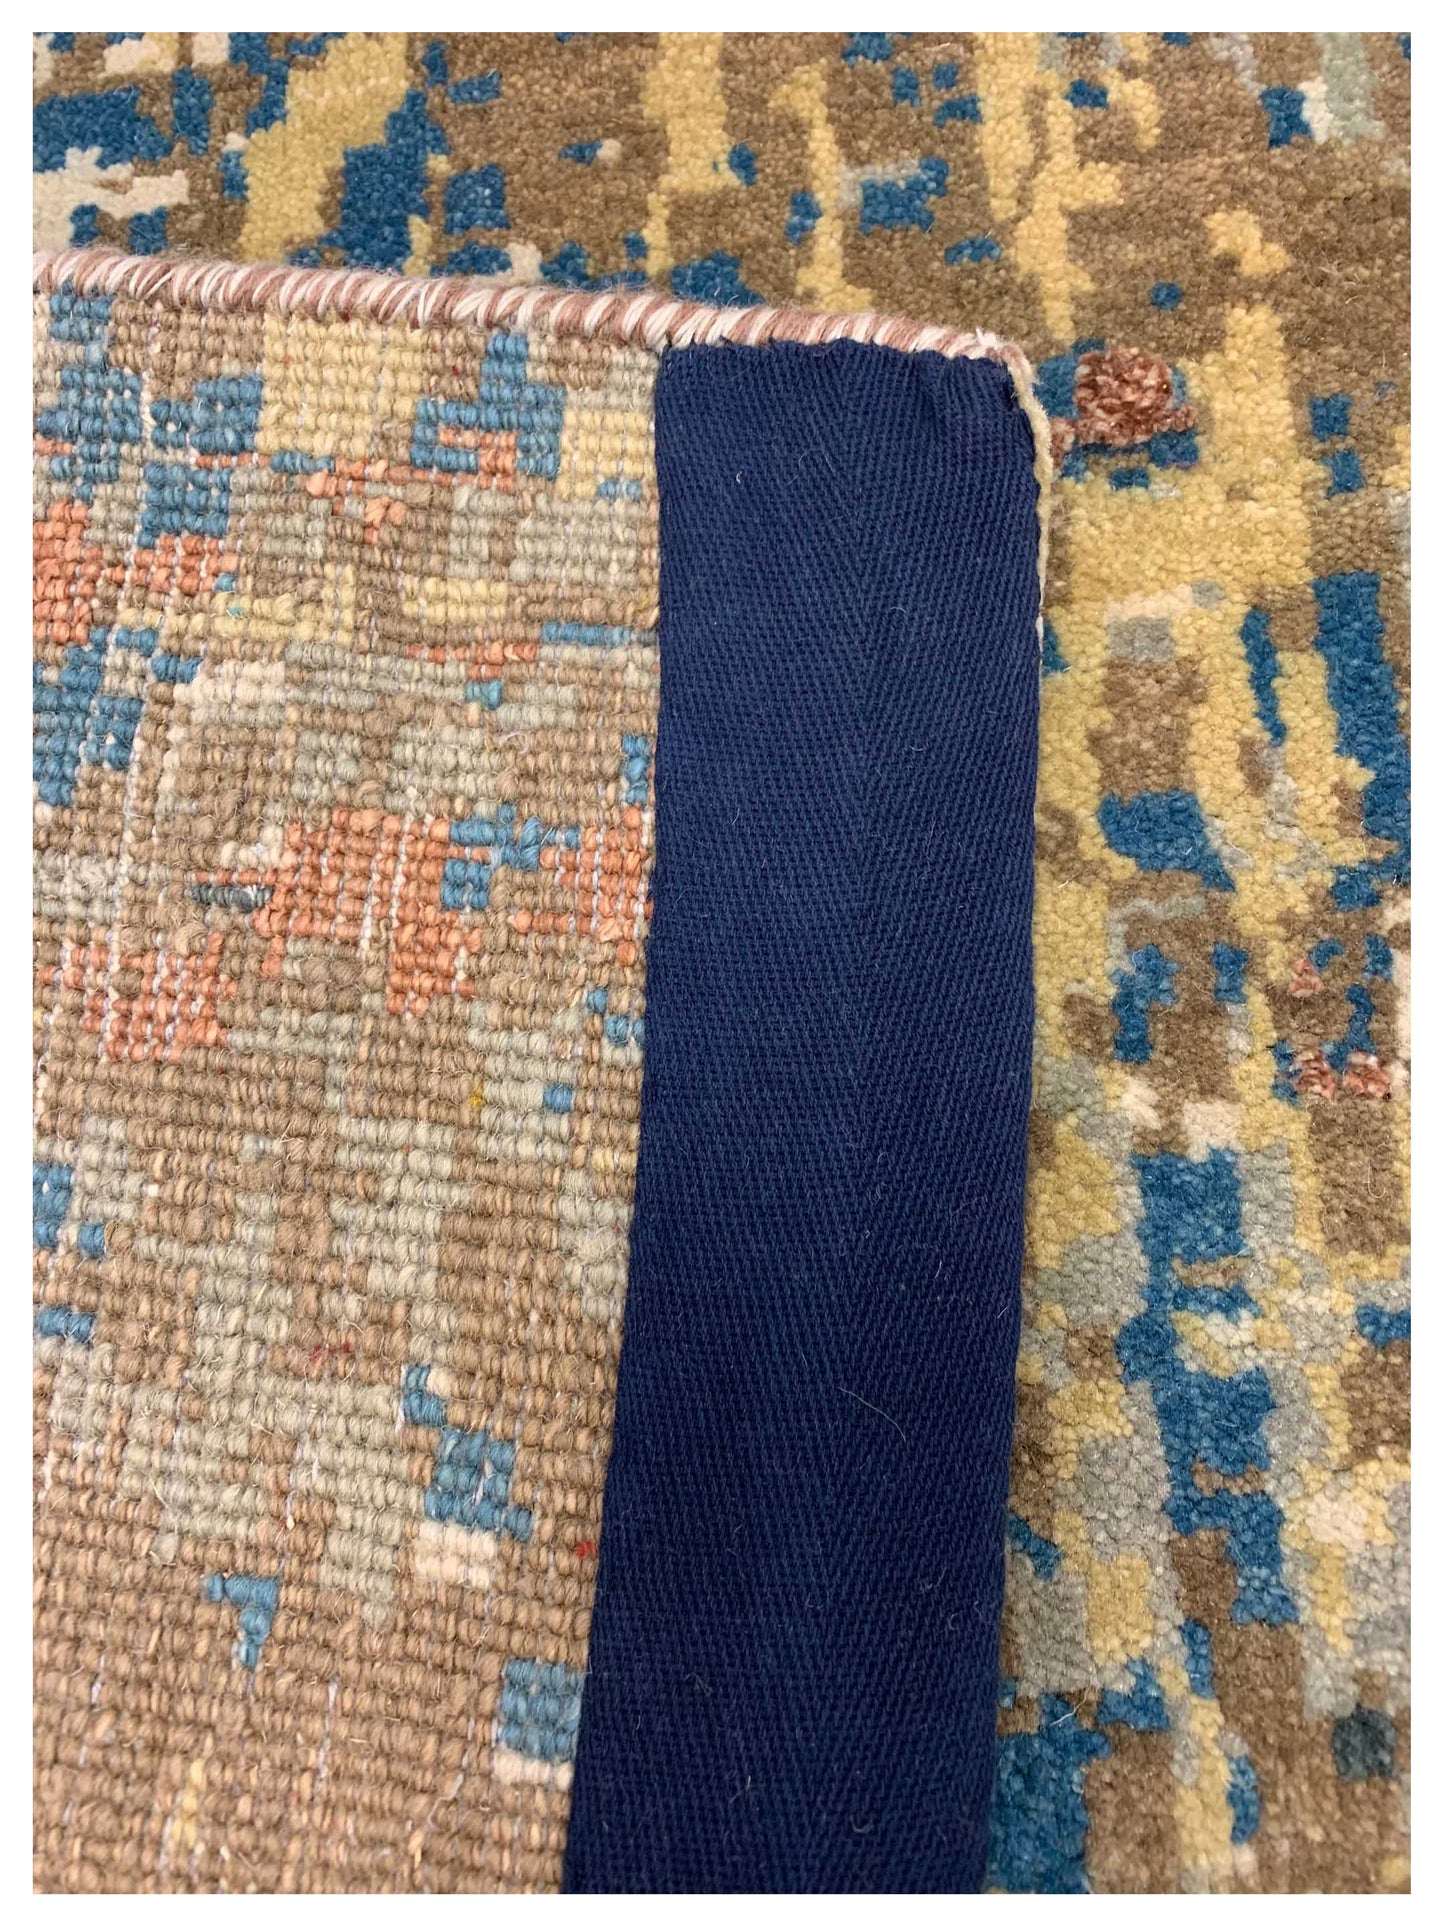 Artisan Mary  Multi  Contemporary Knotted Rug